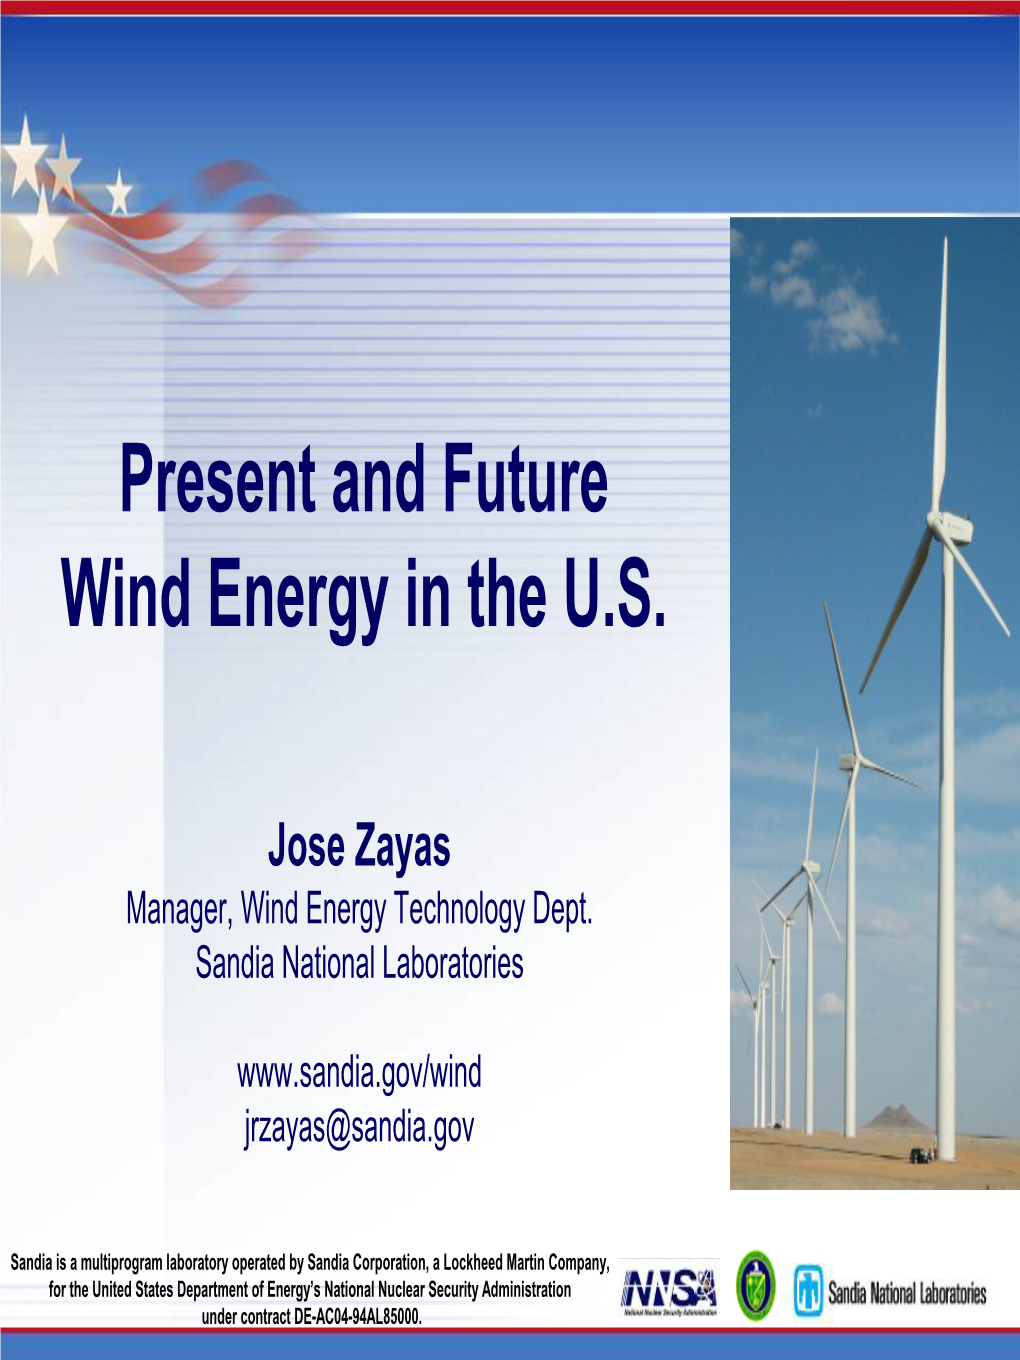 Present and Future Wind Energy in the U.S